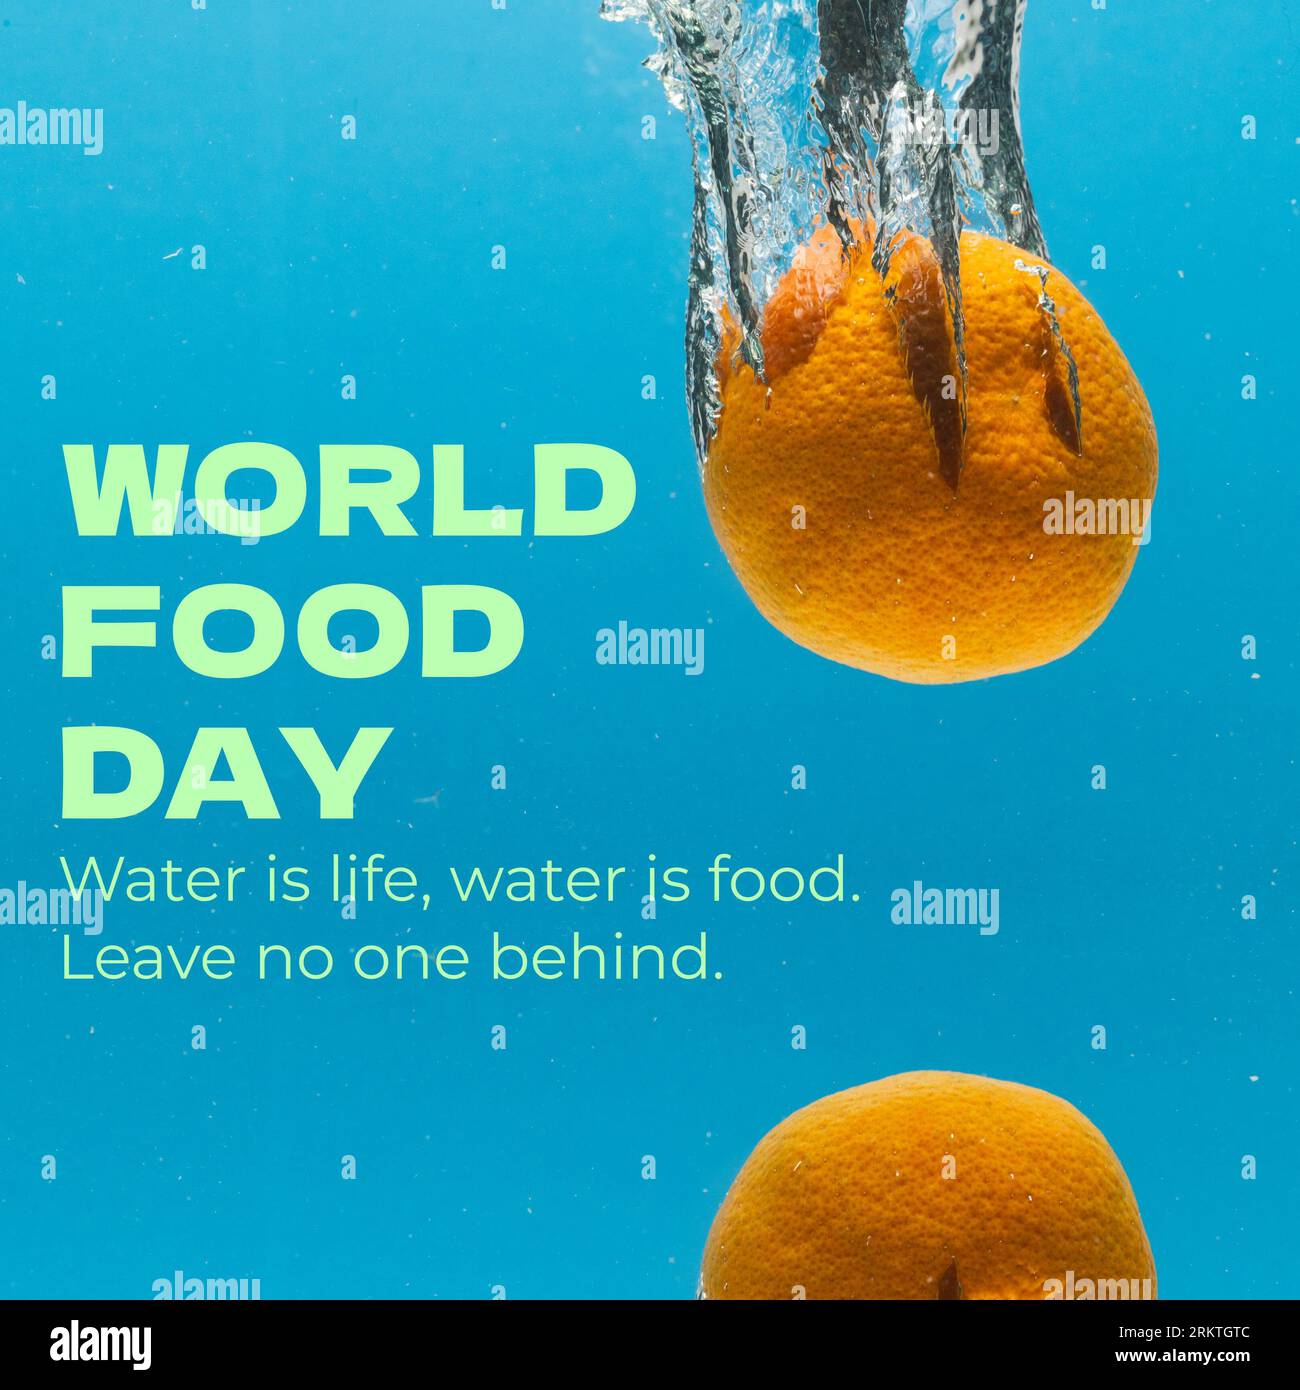 World food day and water is life, water is food, leave no one behind over oranges falling in water Stock Photo